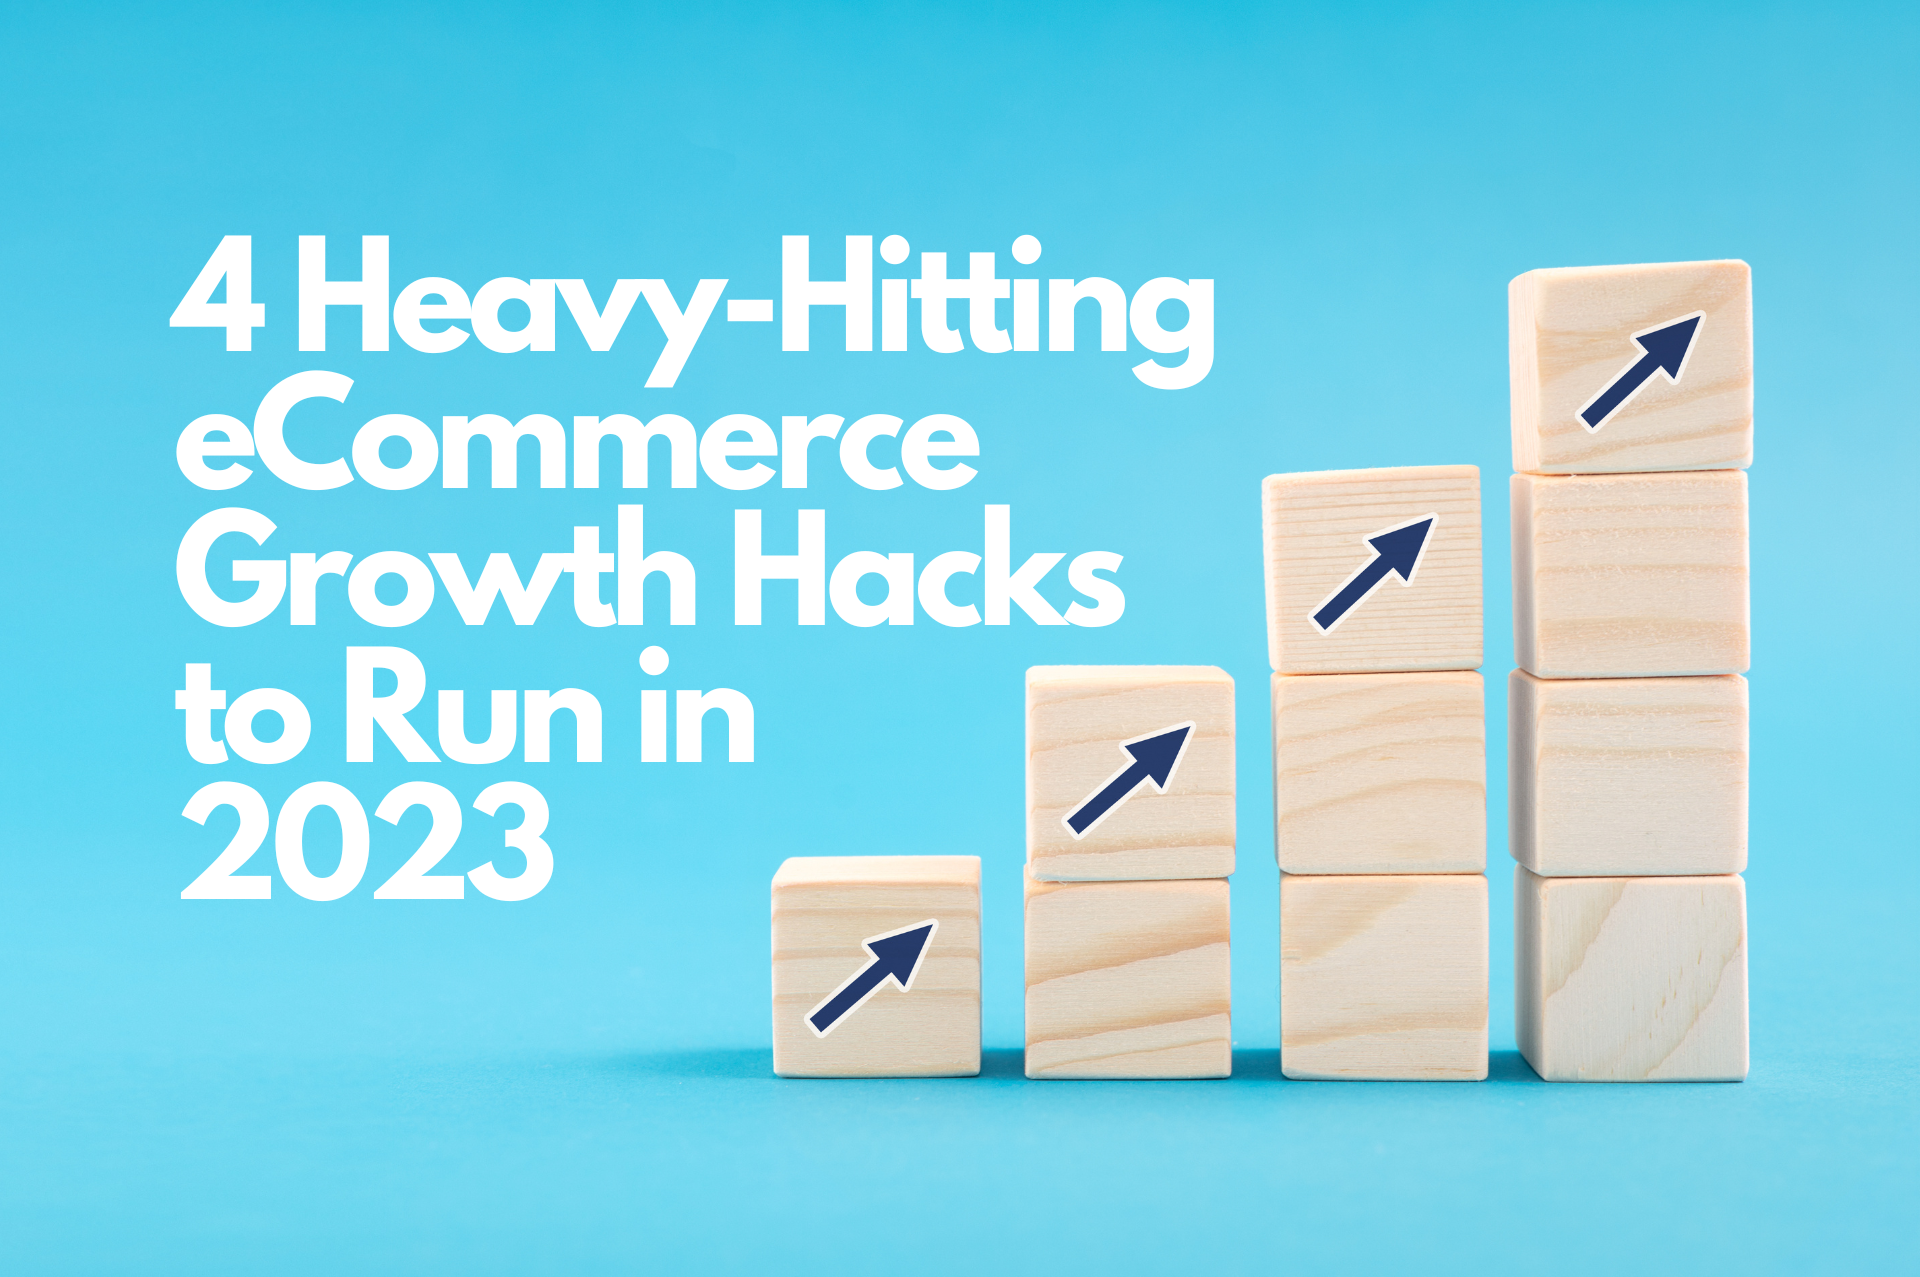 4 Heavy-Hitting eCommerce Growth Hacks to Run in 2023 - White text on alight blue background with wooden blocks